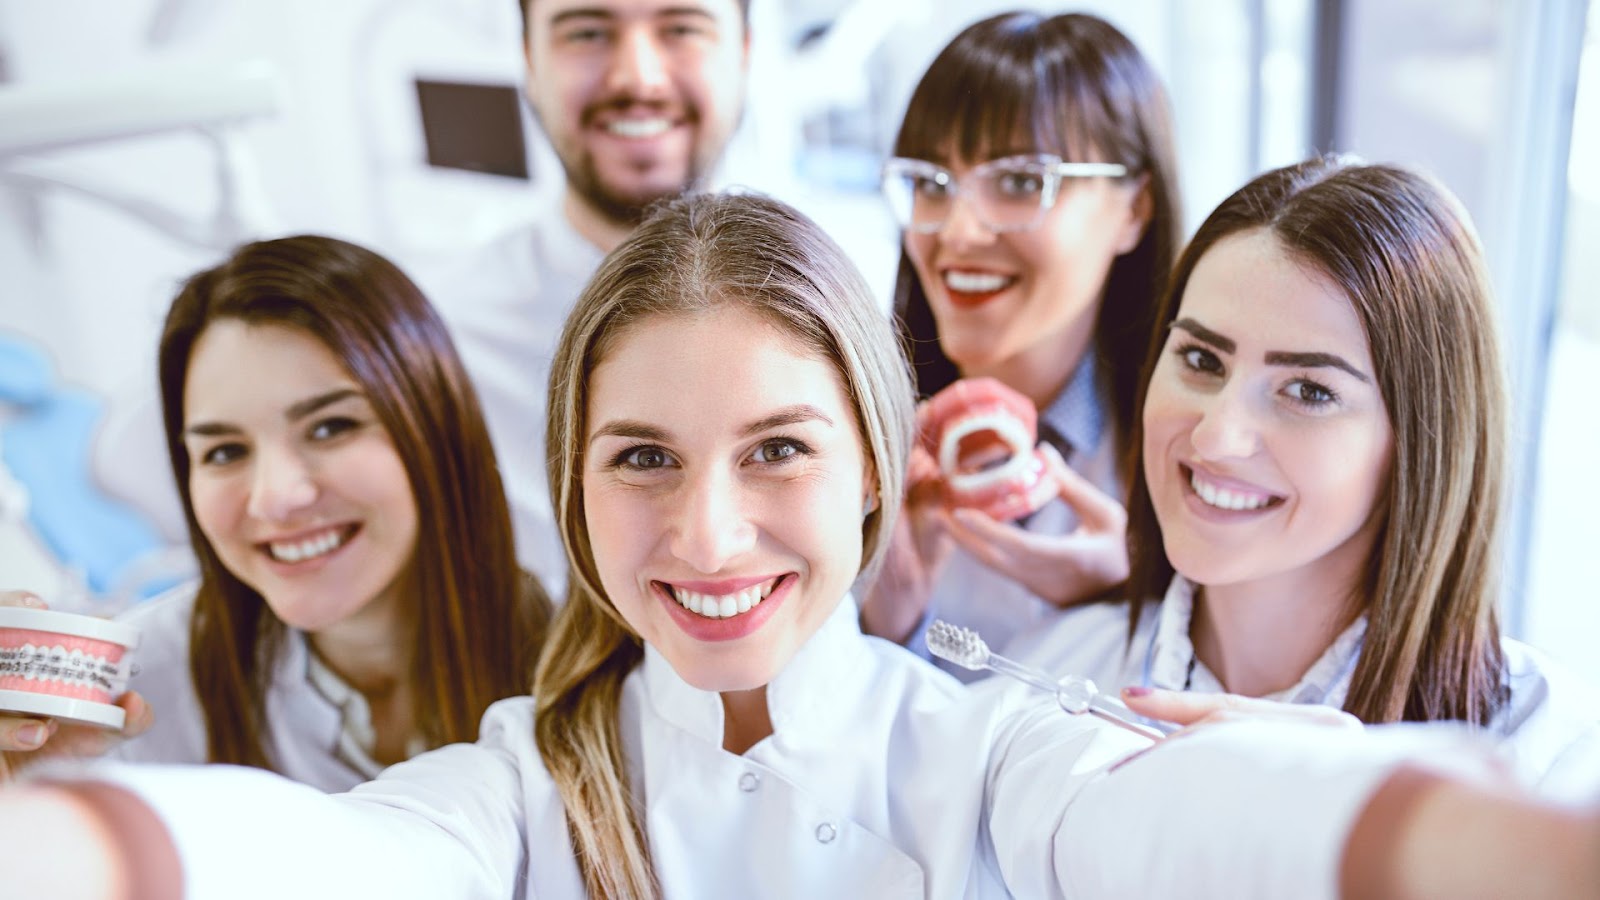 Dental Implant Marketing – Great Vibes From Your Staff and the Sales Process